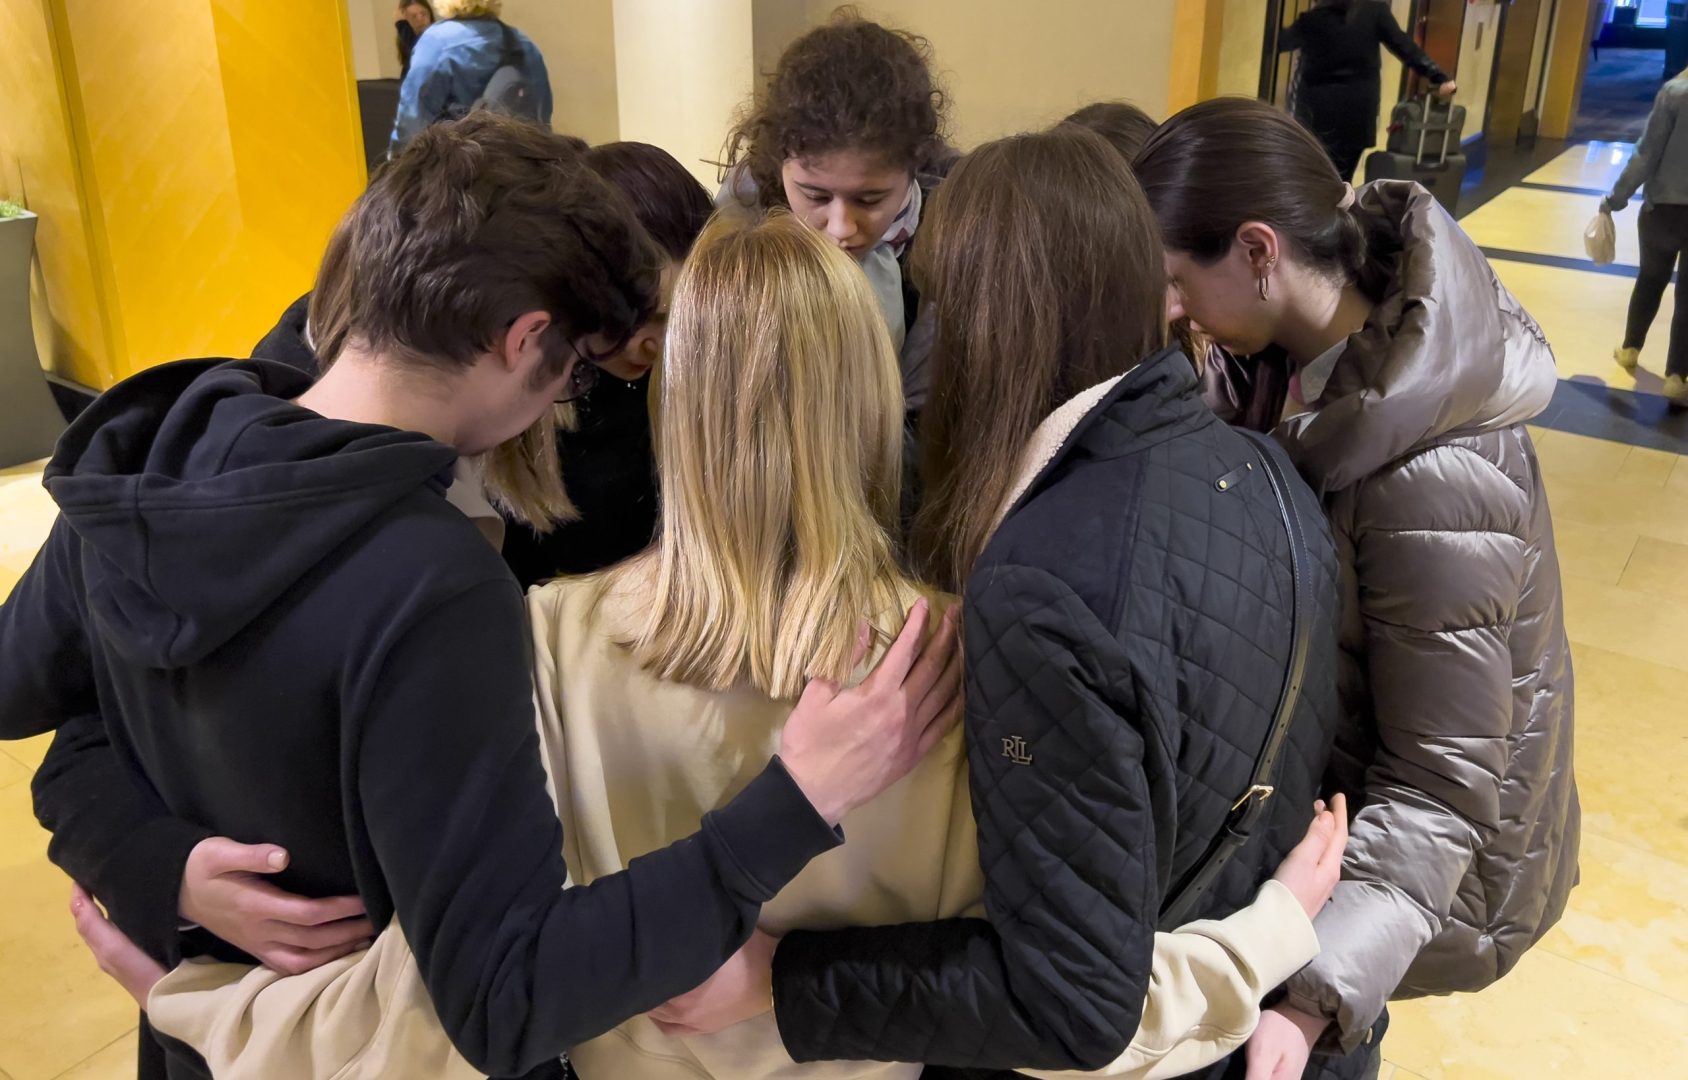 Mariia Pachenko, top center, huddles with Ukrainian peers in prayer on April 8, 2022, as the group disbands after spending nearly a week together taking part in the National Model United Nations Conference in New York. (AP Photo/Bobby Caina Calvan)